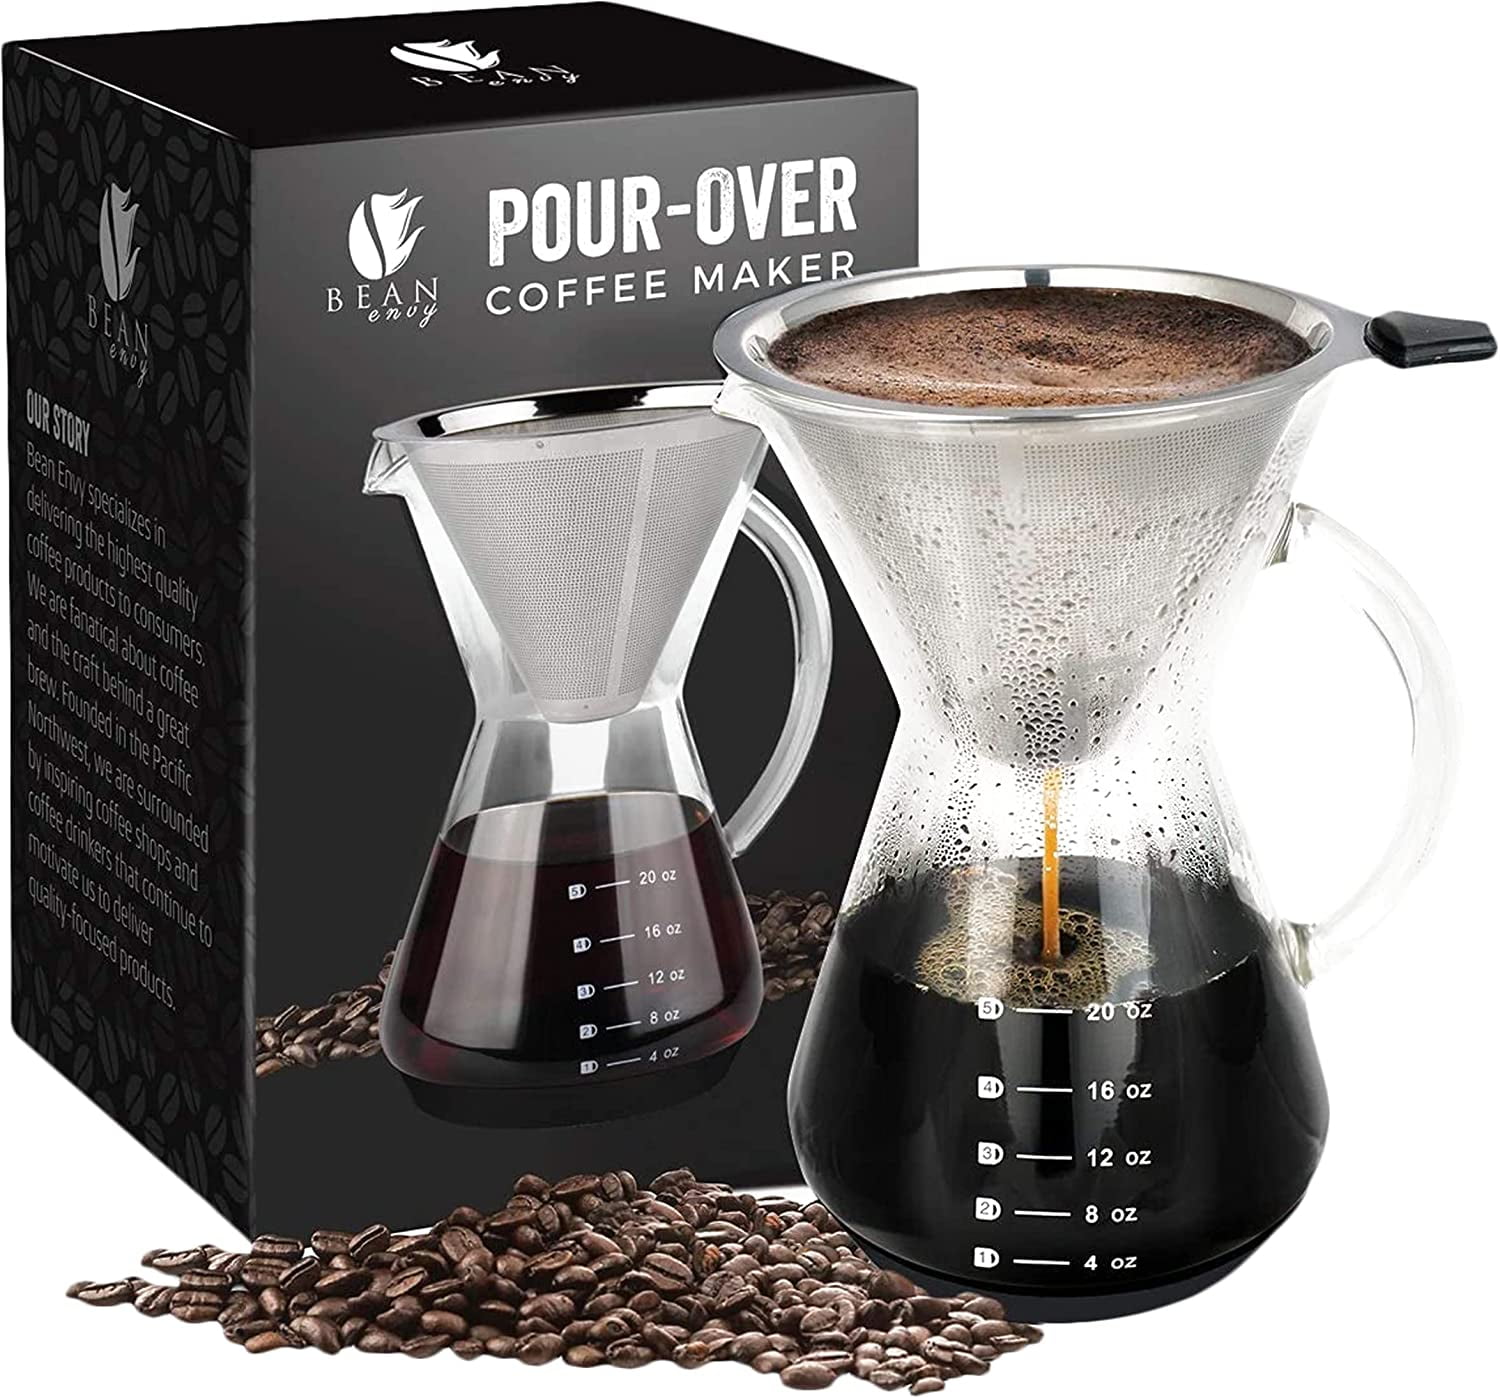 Coffee Gator Pour Over Coffee Maker, 14 oz, Glass Carafe Only, No Filter